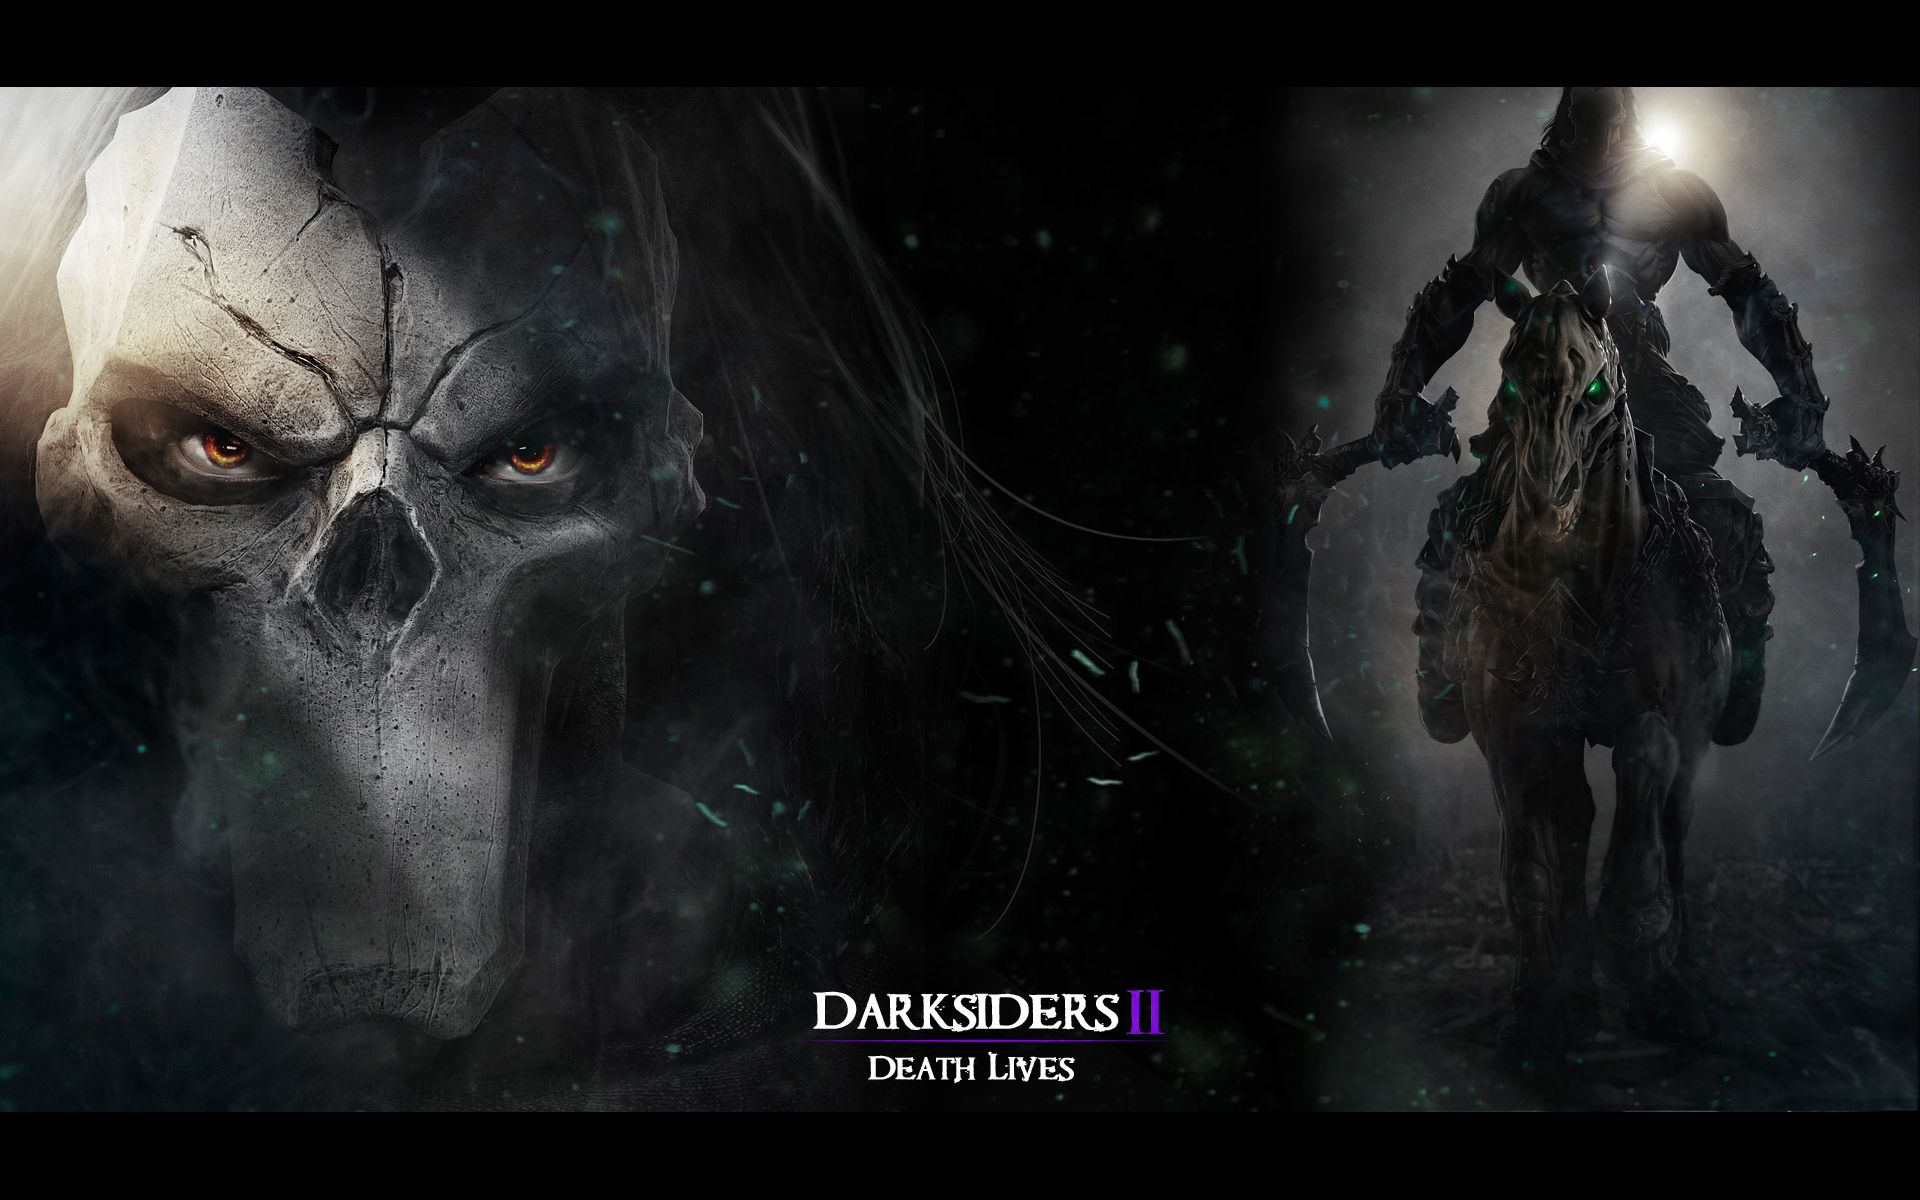 19 Darksiders HD Wallpapers | Backgrounds - Wallpaper Abyss